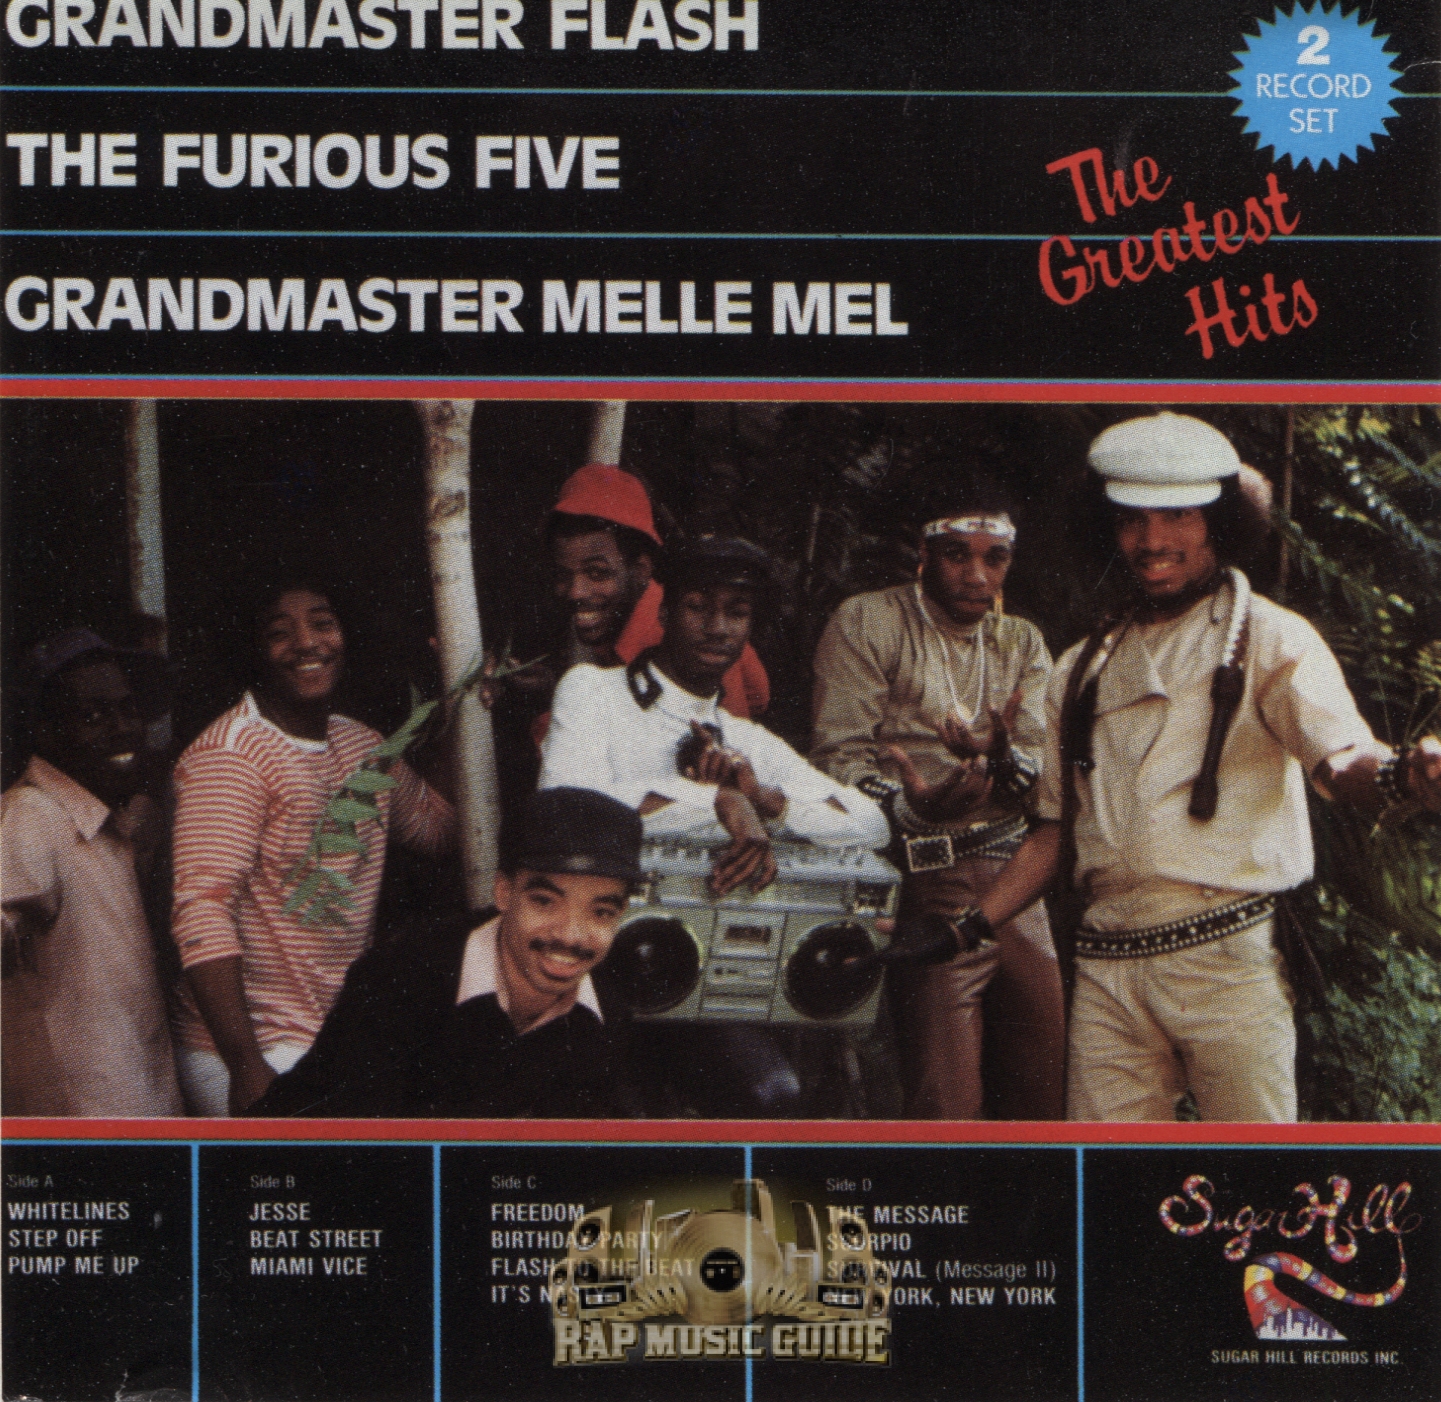 Grandmaster Flash & The Furious Five: albums, songs, playlists